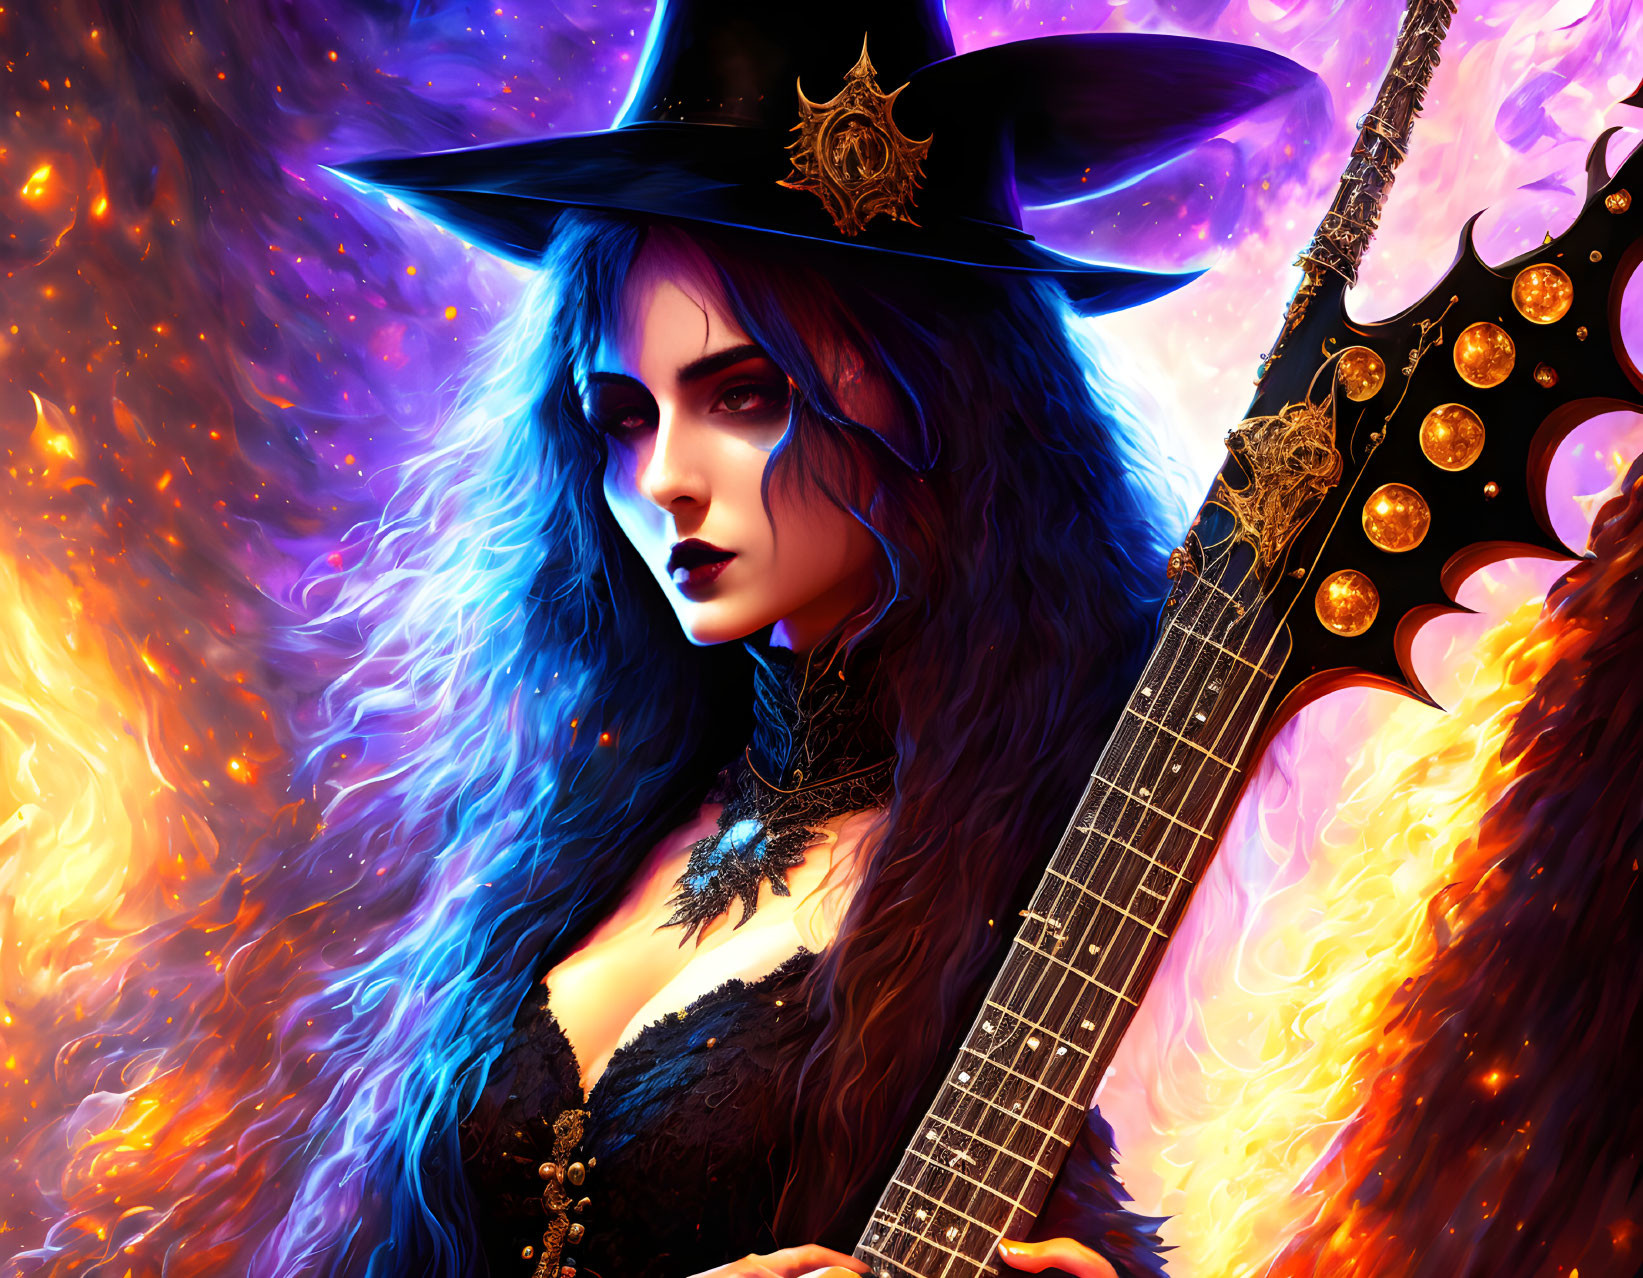 Witch with piercing eyes holding a guitar in fiery mystical setting